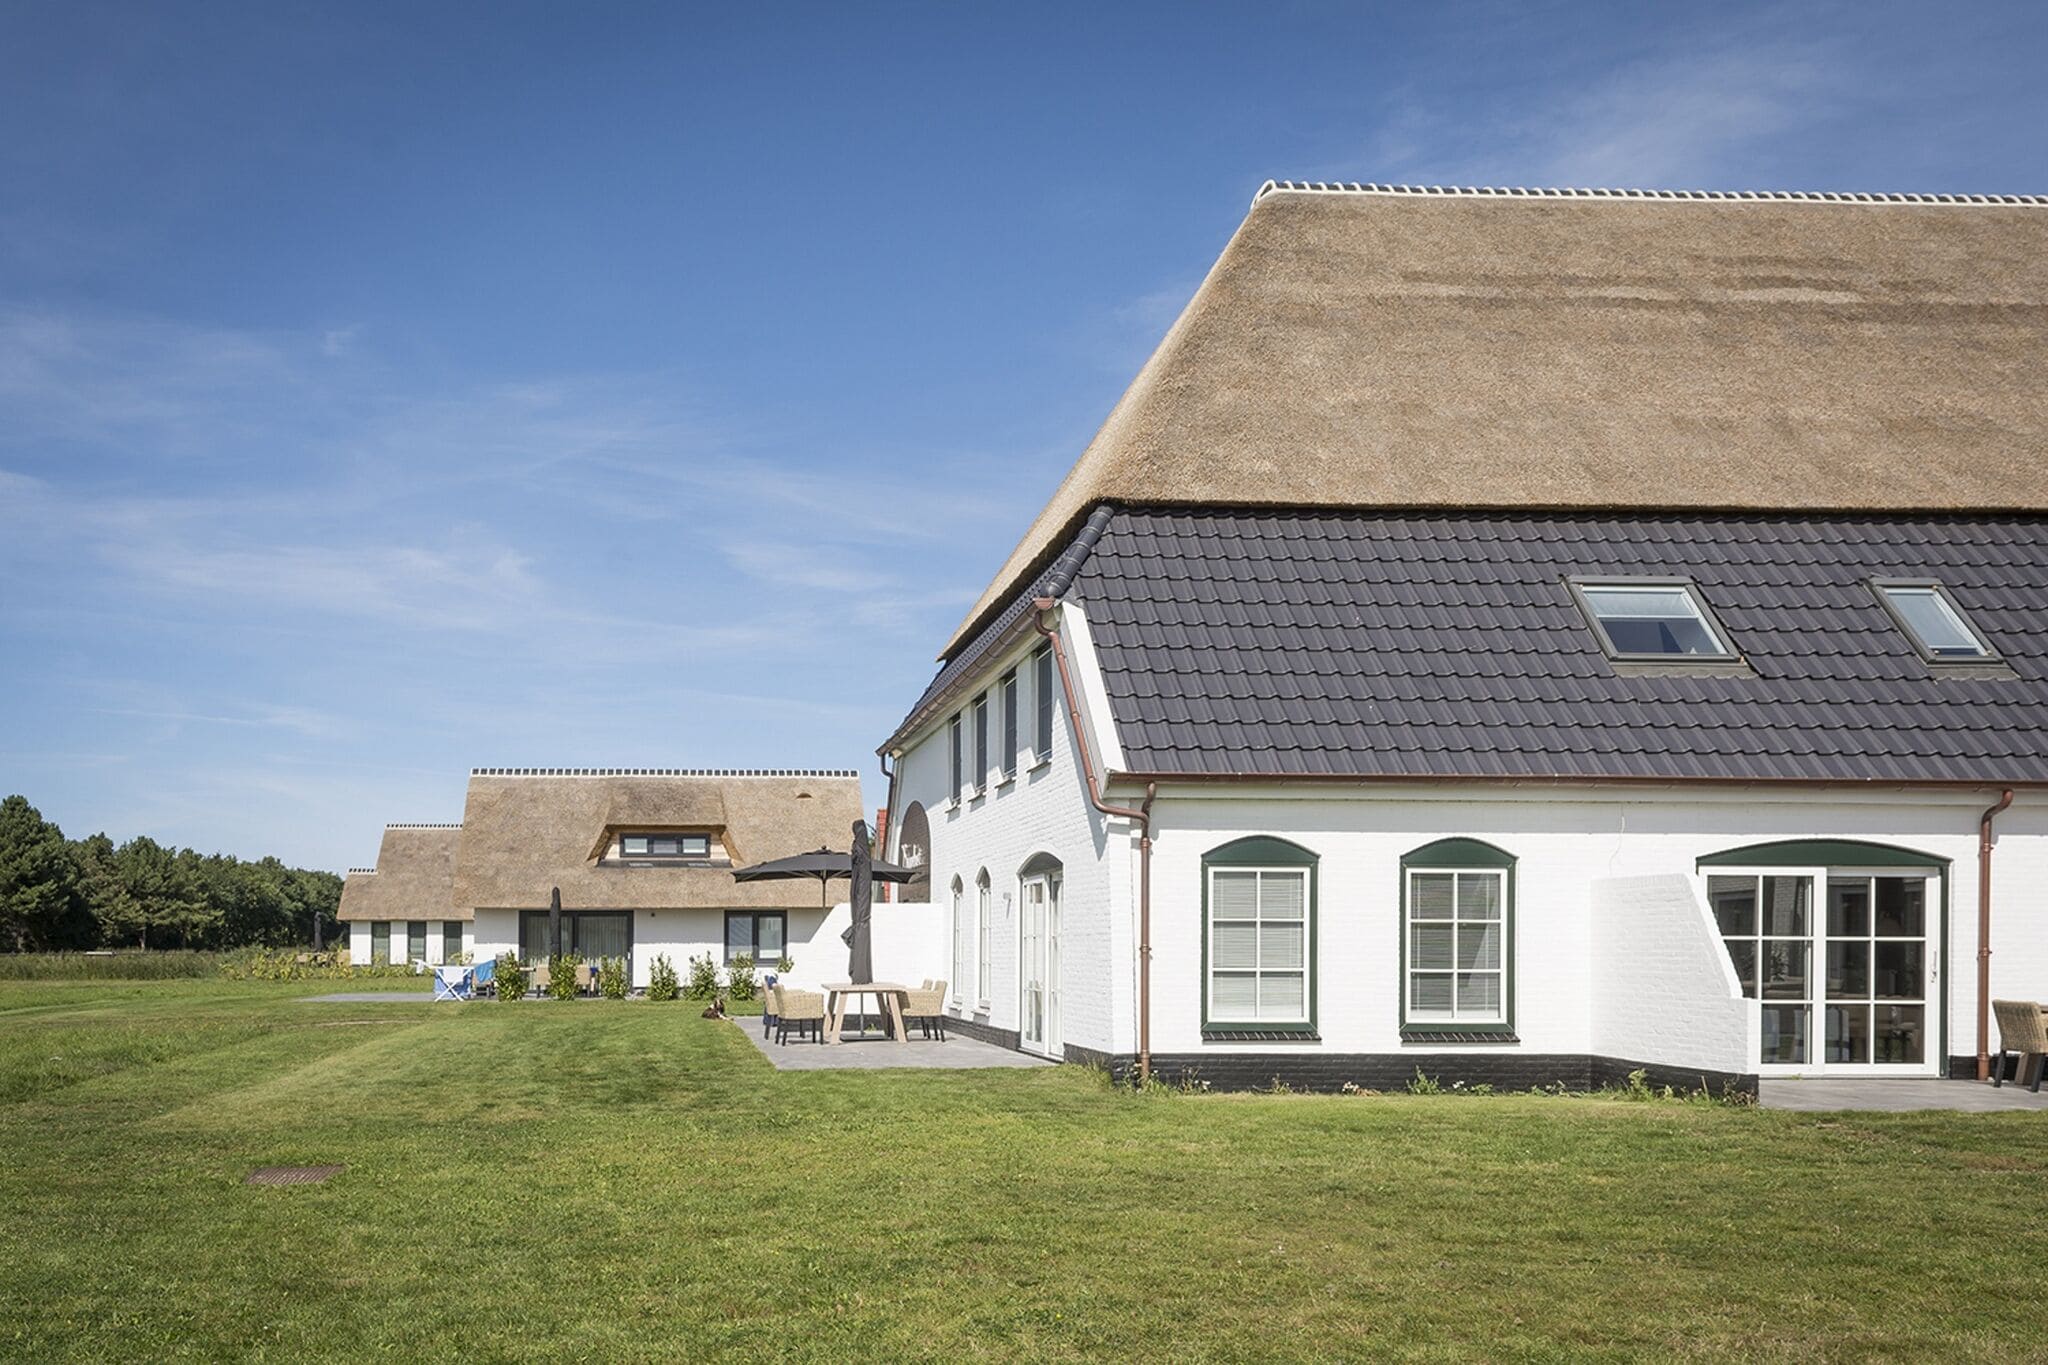 Apartment in tasteful farmhouse in De Cocksdorp, on the Wadden island of Texel